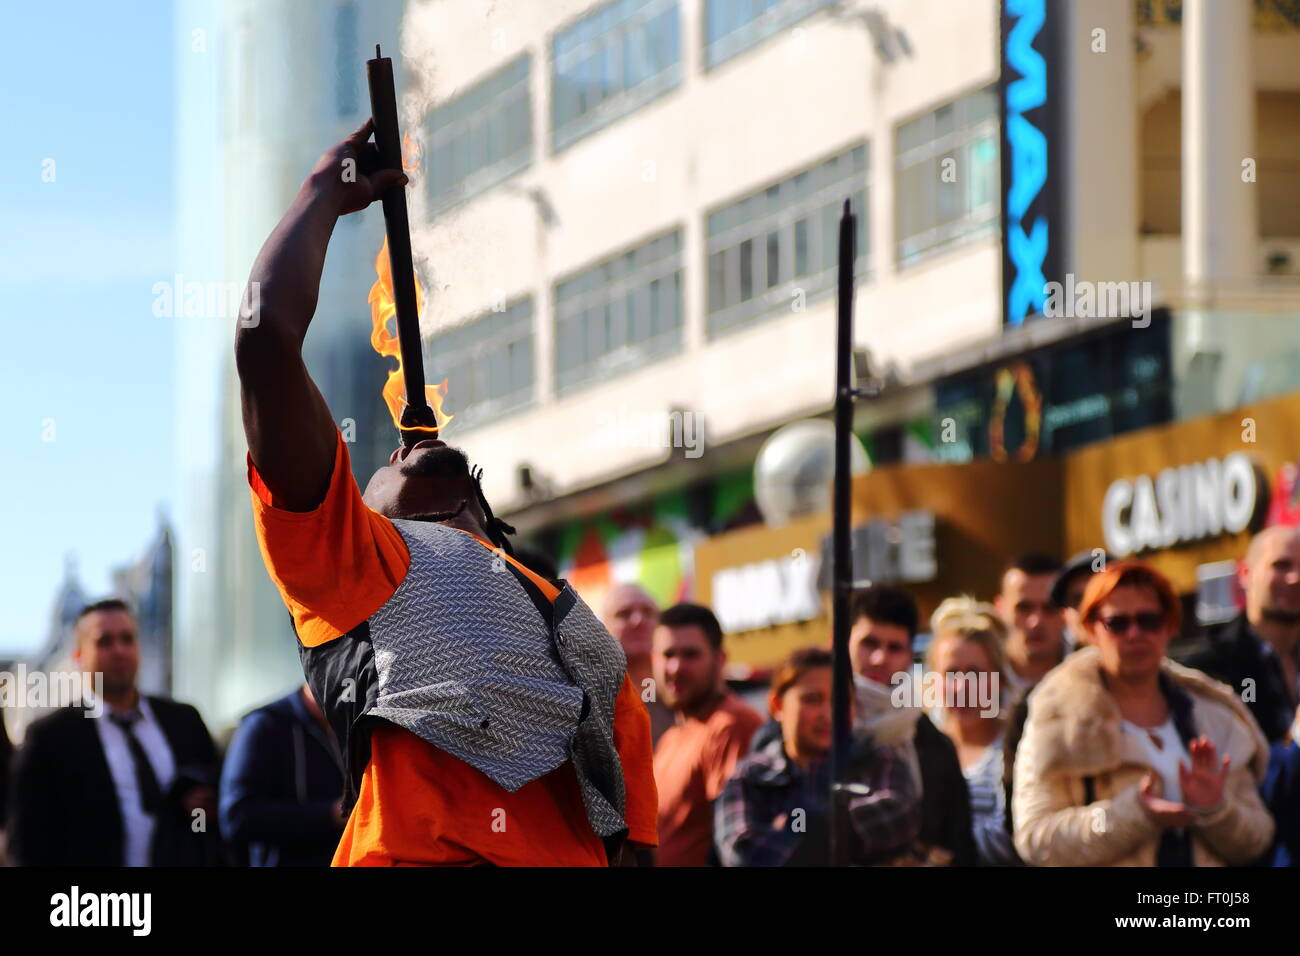 A street performer captures the audience in Leicester Square, London, UK Stock Photo